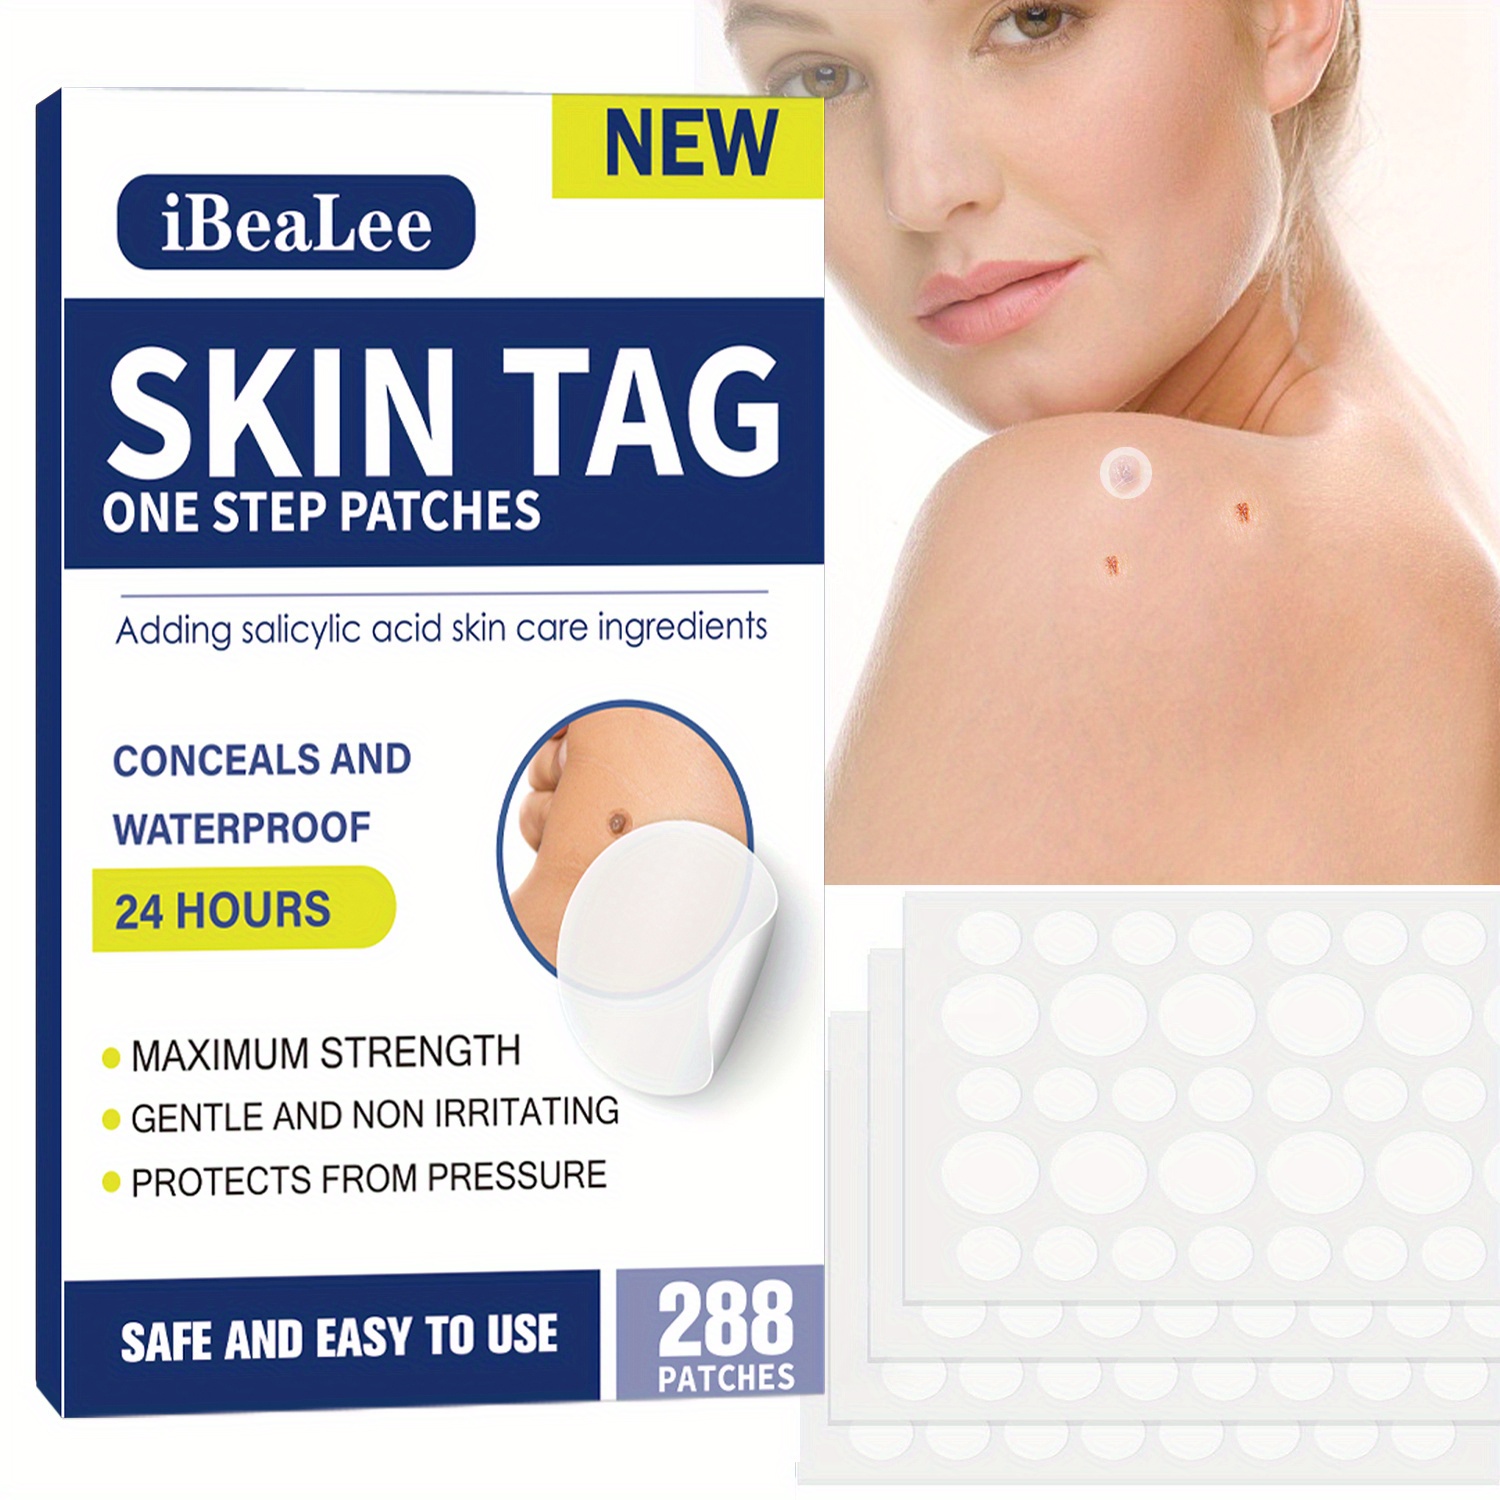 

Ibealee Skin Tag Remover Patches, 288 Count - Unisex Adult, Formaldehyde-free, All Skin Types - Salicylic Acid Infused, Maximum Strength, Waterproof - Hassle-free, Non-irritating Blemish Cover-up